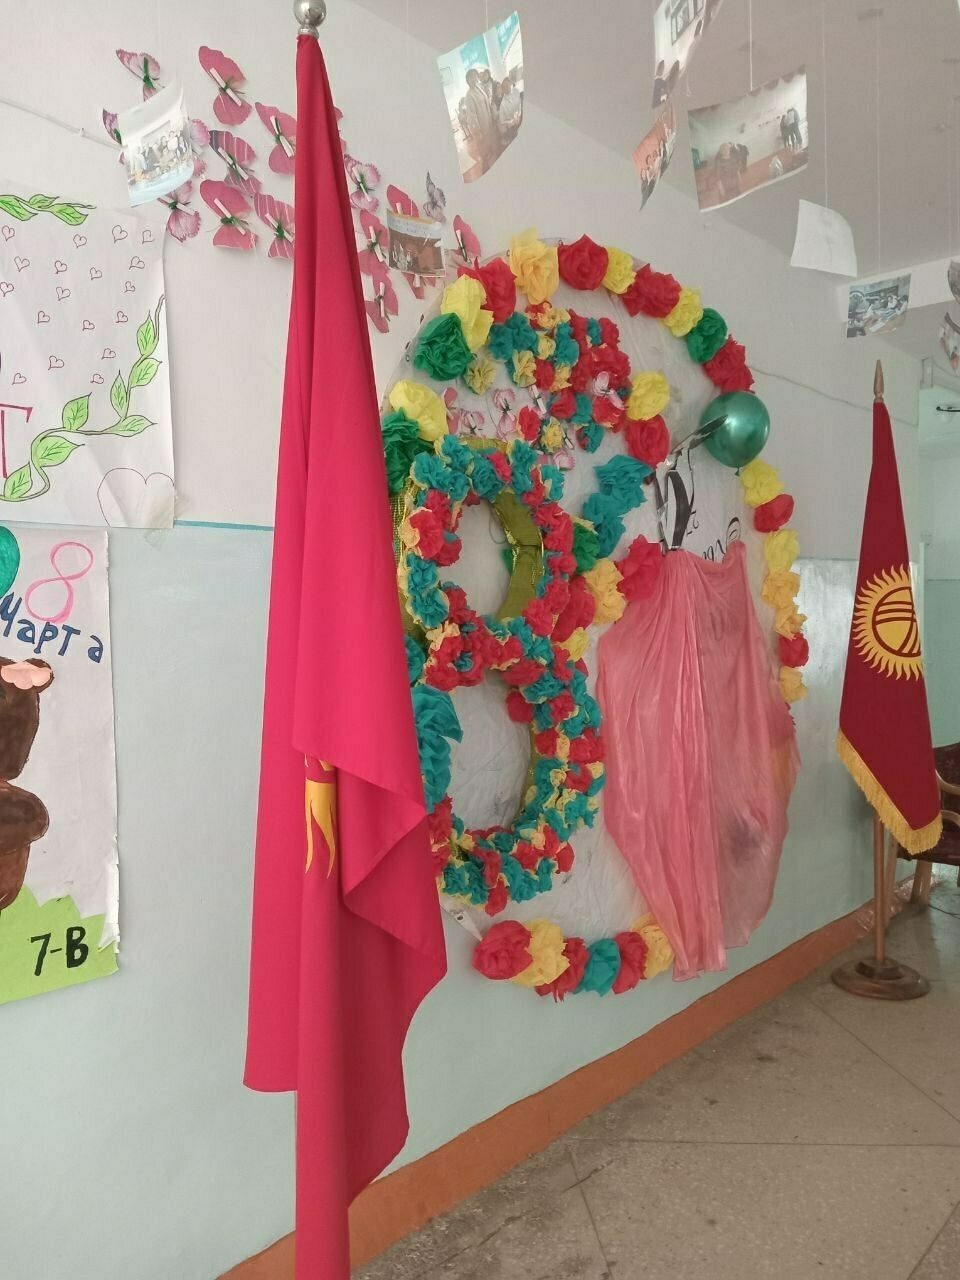 [old] Kyrgyz flags on either side of an "8" made out of colorful paper flowers on the wall. paper pictures of teachers while at the school hanging from the ceiling 